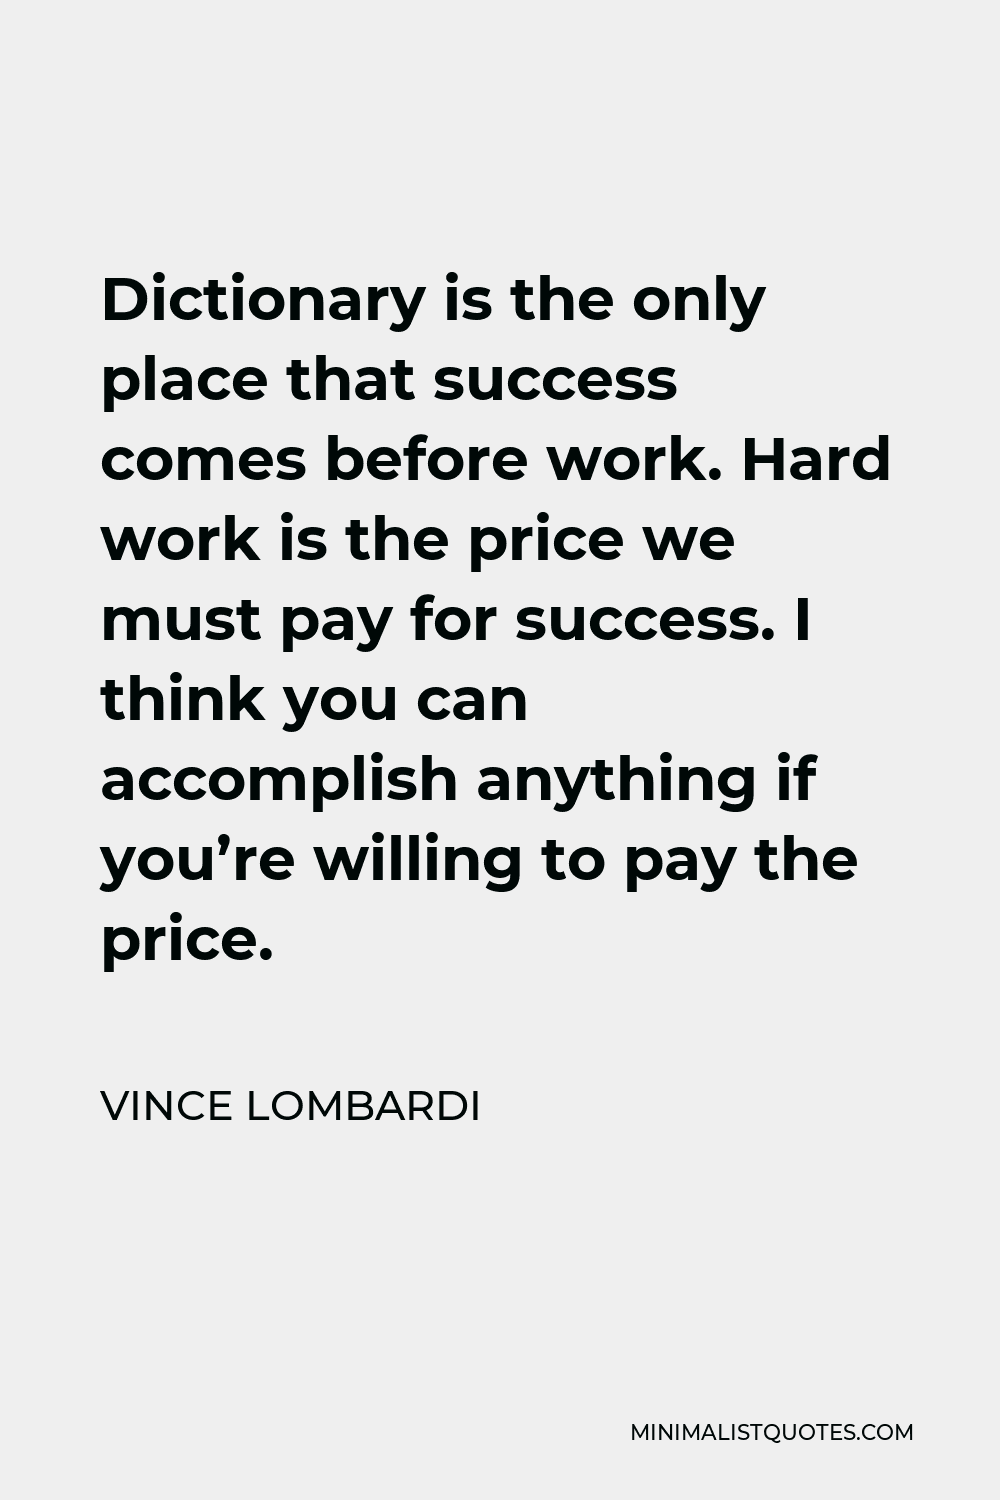 Vince Lombardi Quote - Dictionary is the only place that success comes before work. Hard work is the price we must pay for success. I think you can accomplish anything if you’re willing to pay the price.